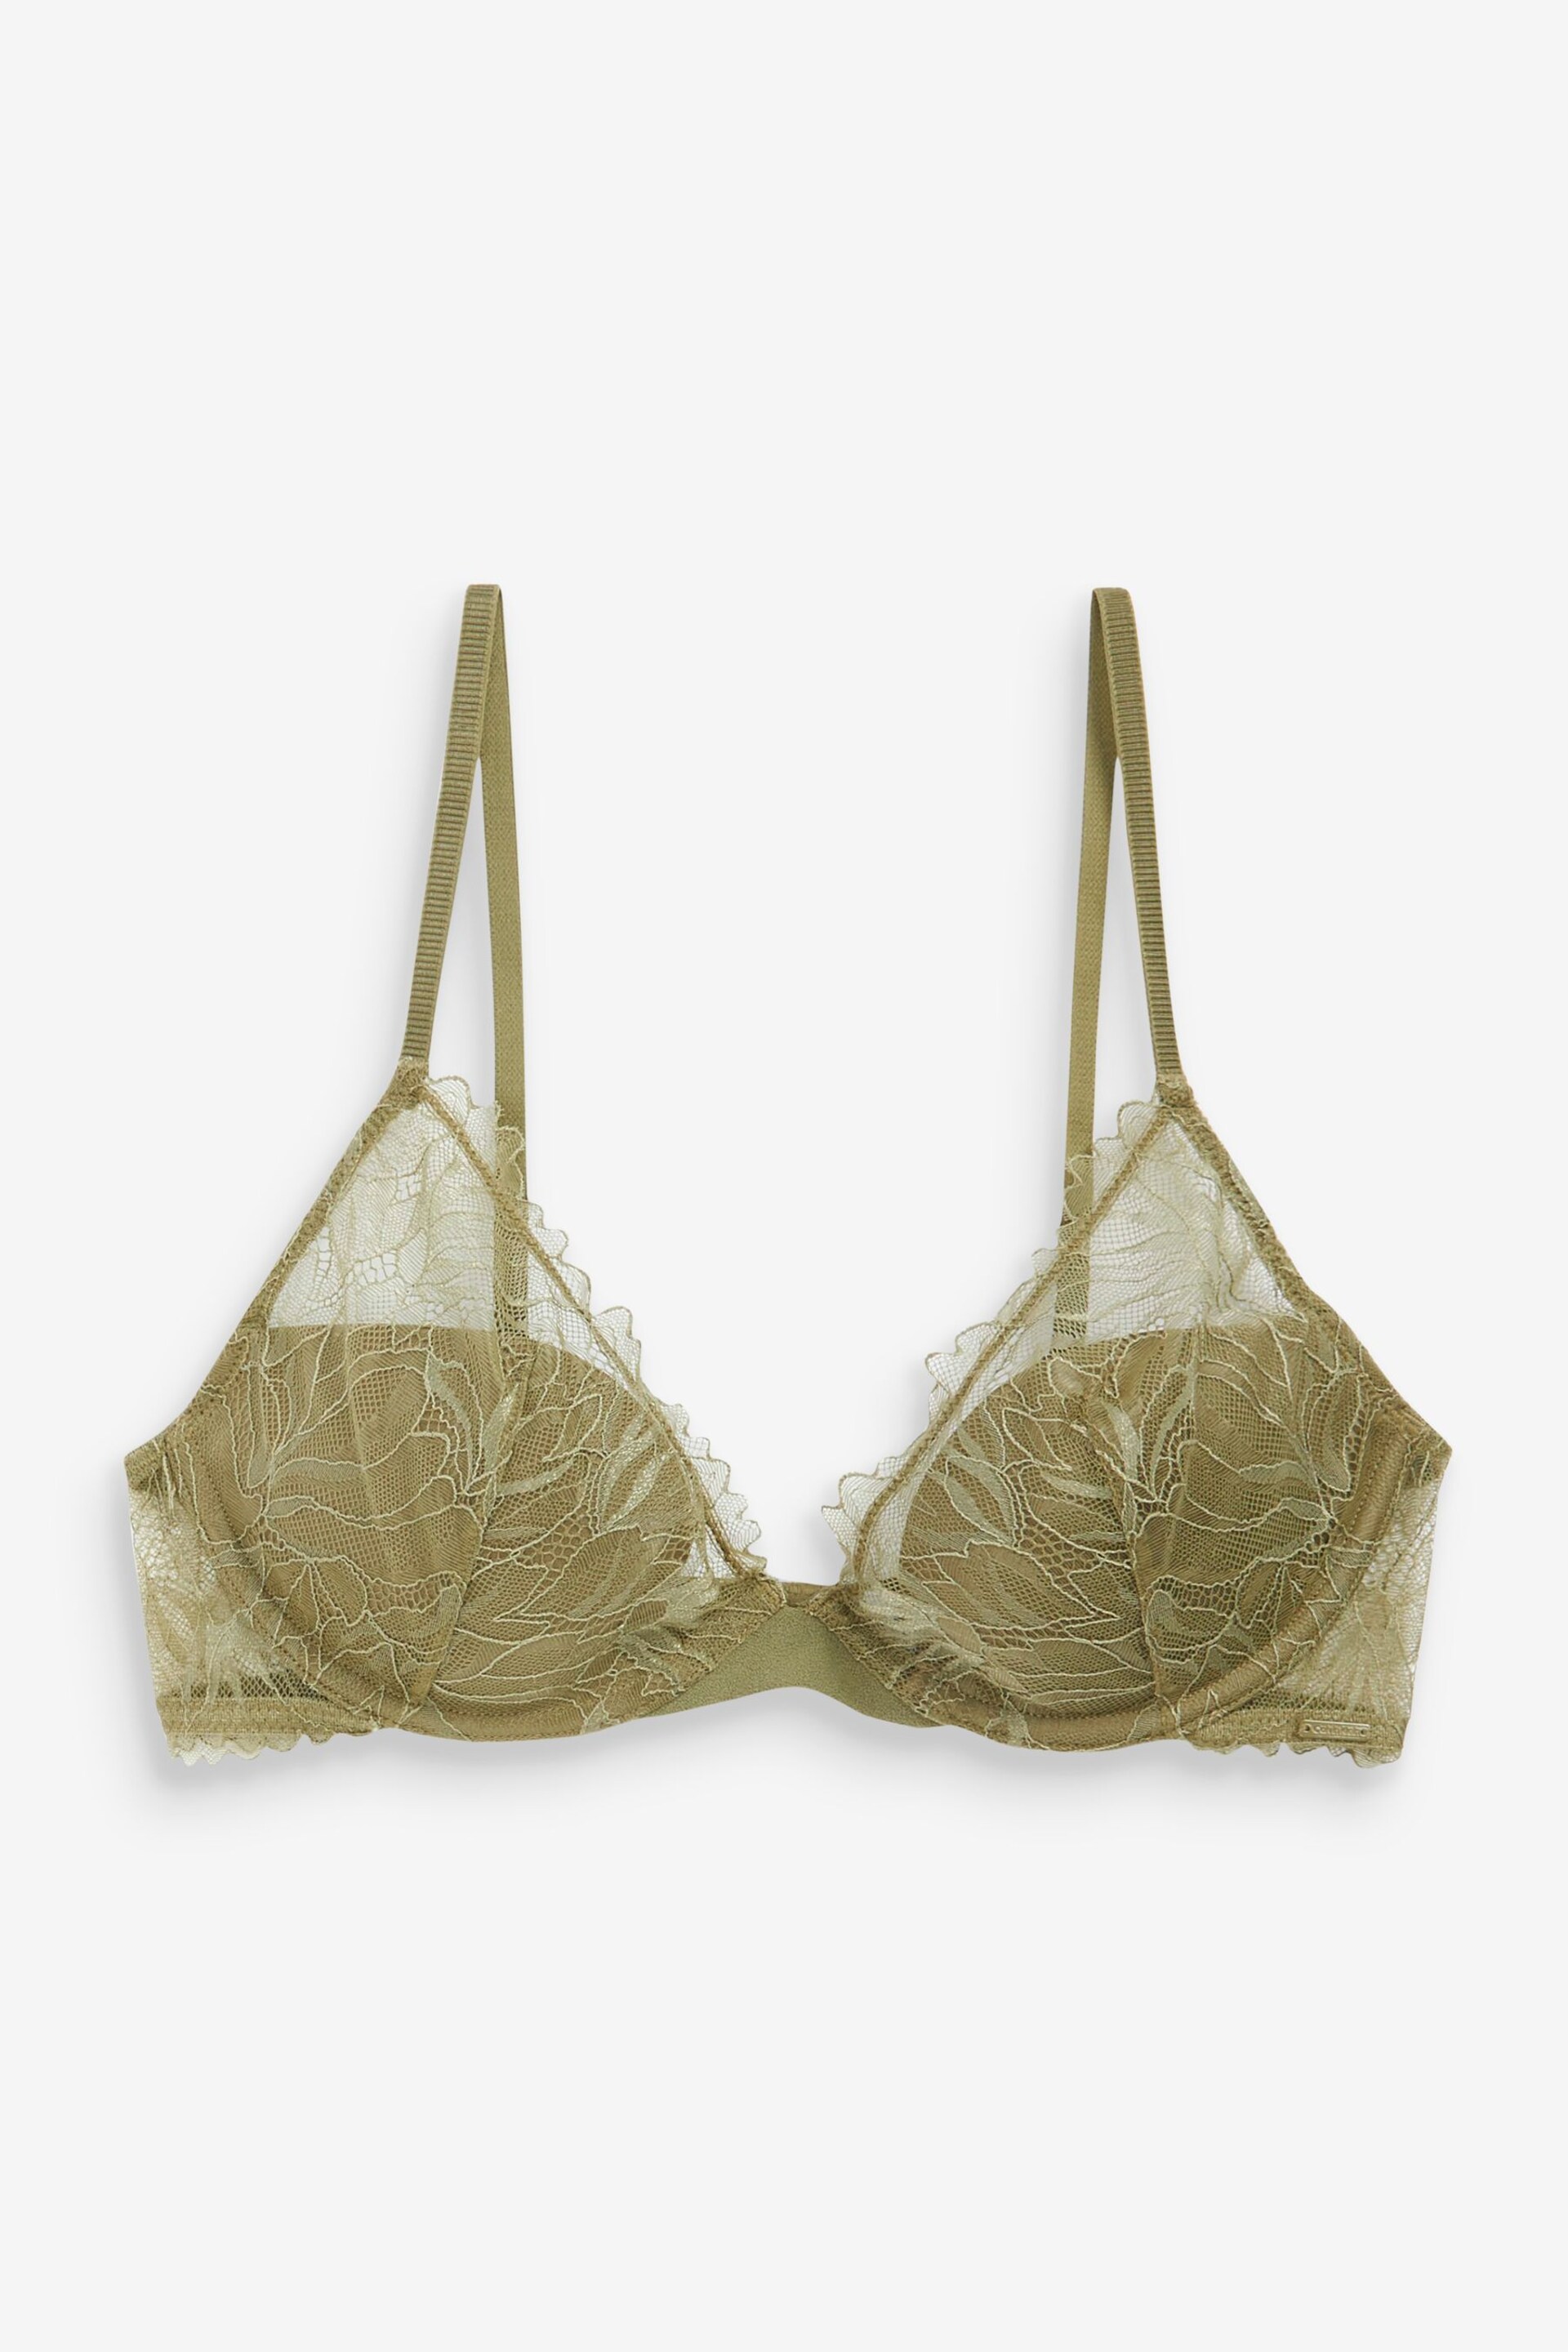 Calvin Klein Green Floral Lace Plunge Bra - Image 3 of 3